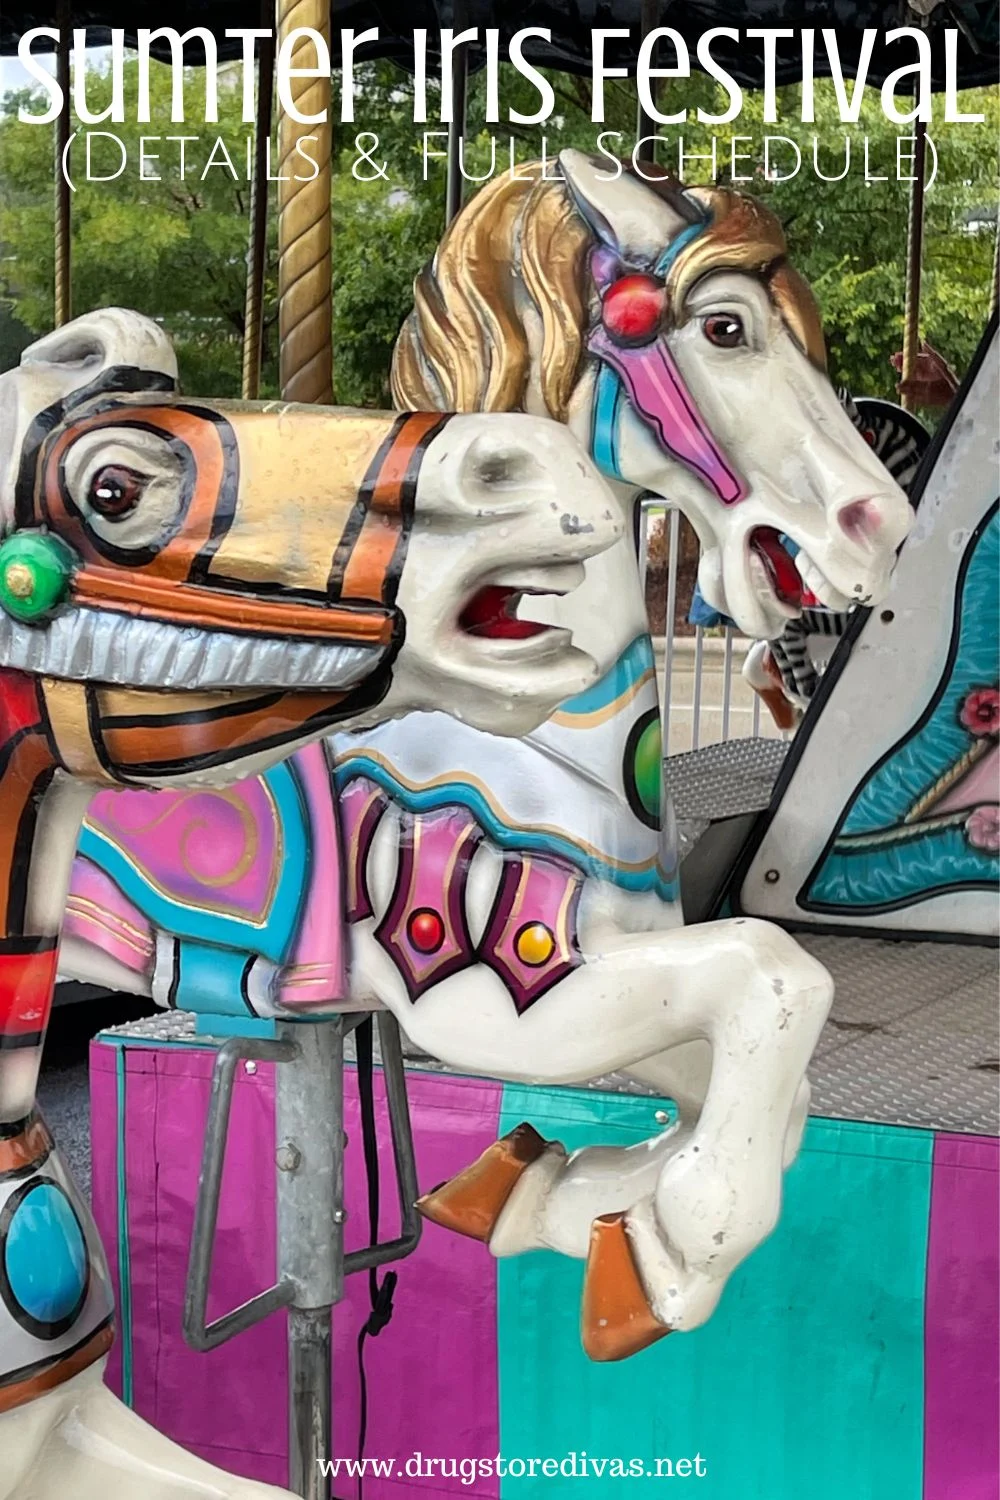 A close up of two carousel horses with the words 